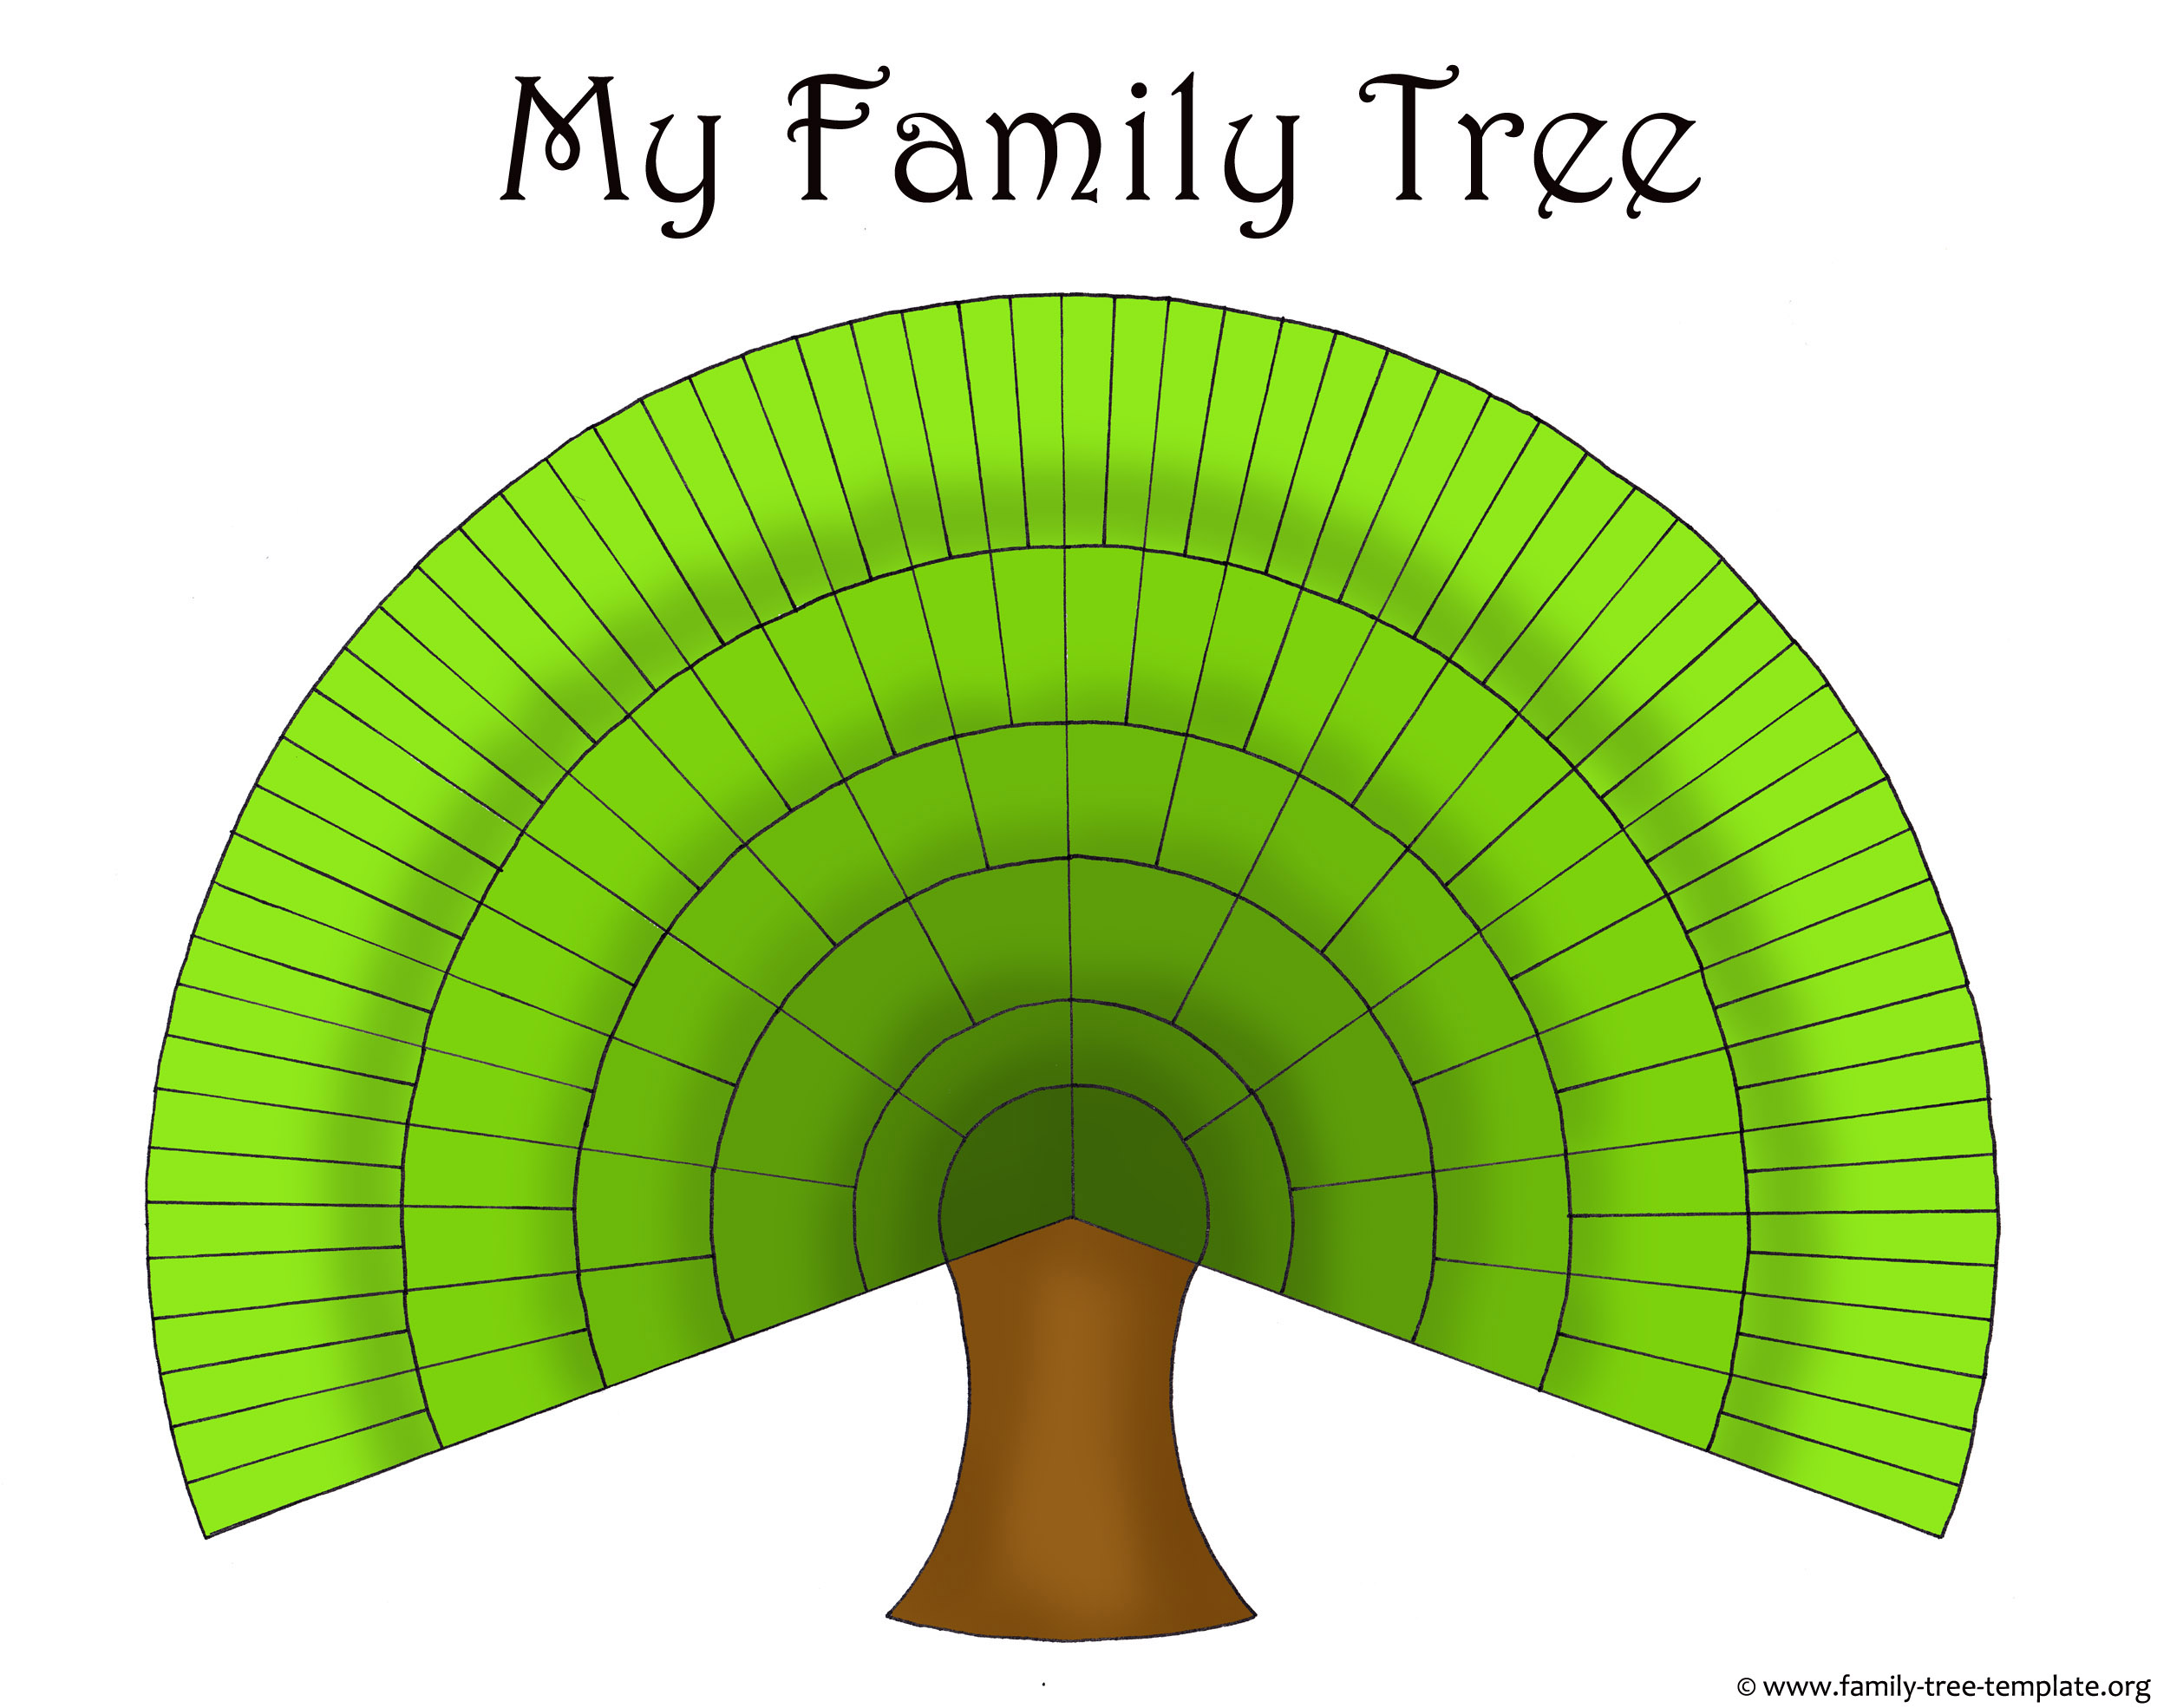 Blank Family Trees Templates And Free Genealogy Graphics   Family    